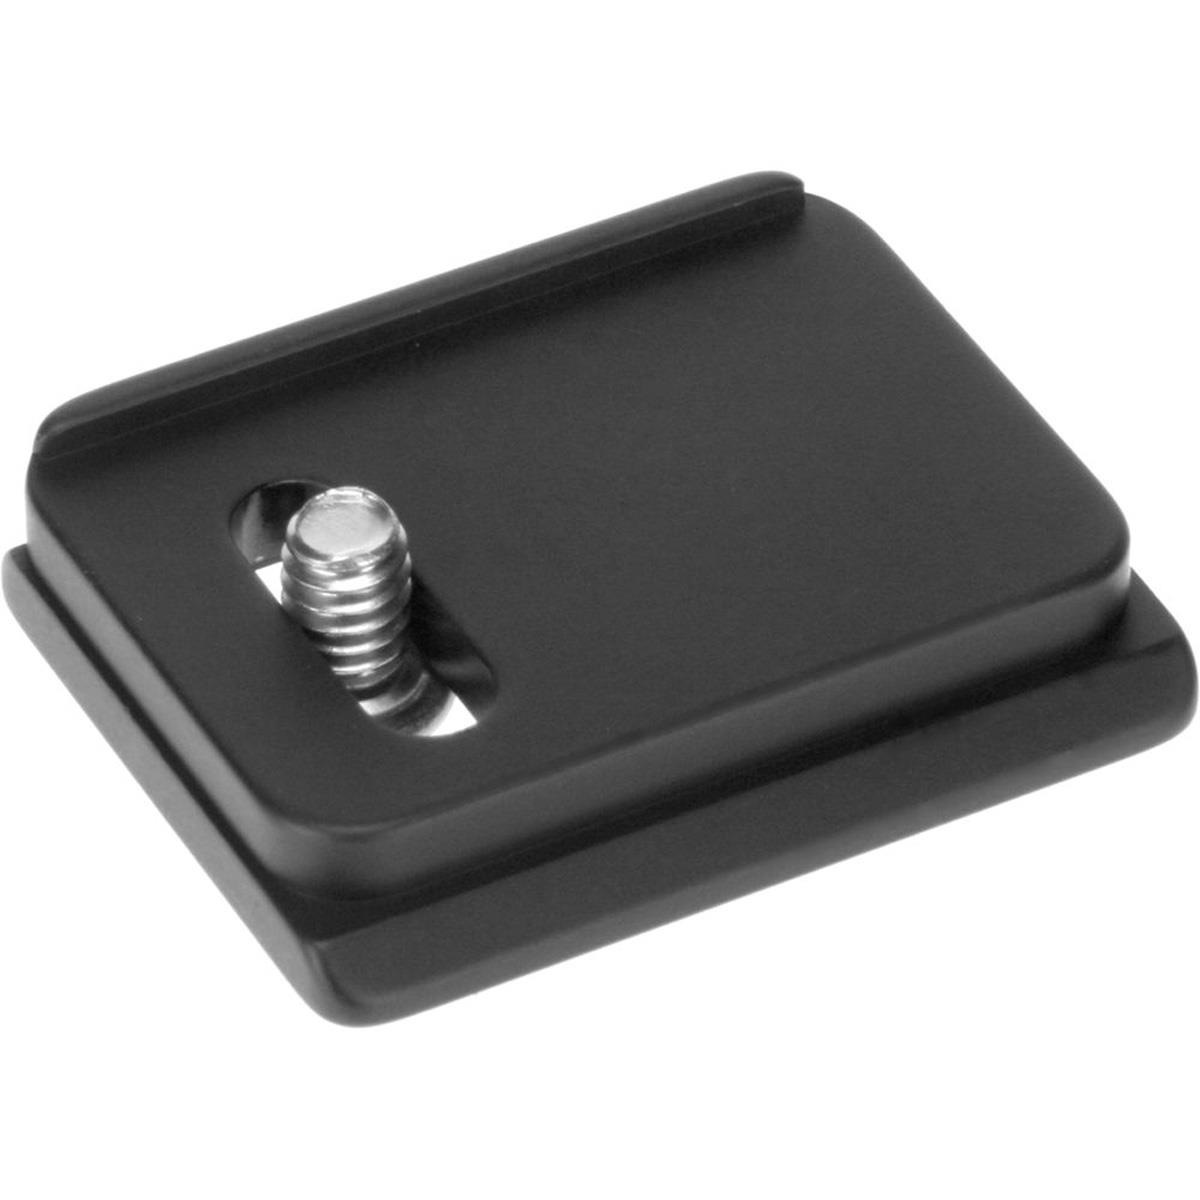 

Acratech 2176 Quick Release Plate for Olympus EP Series